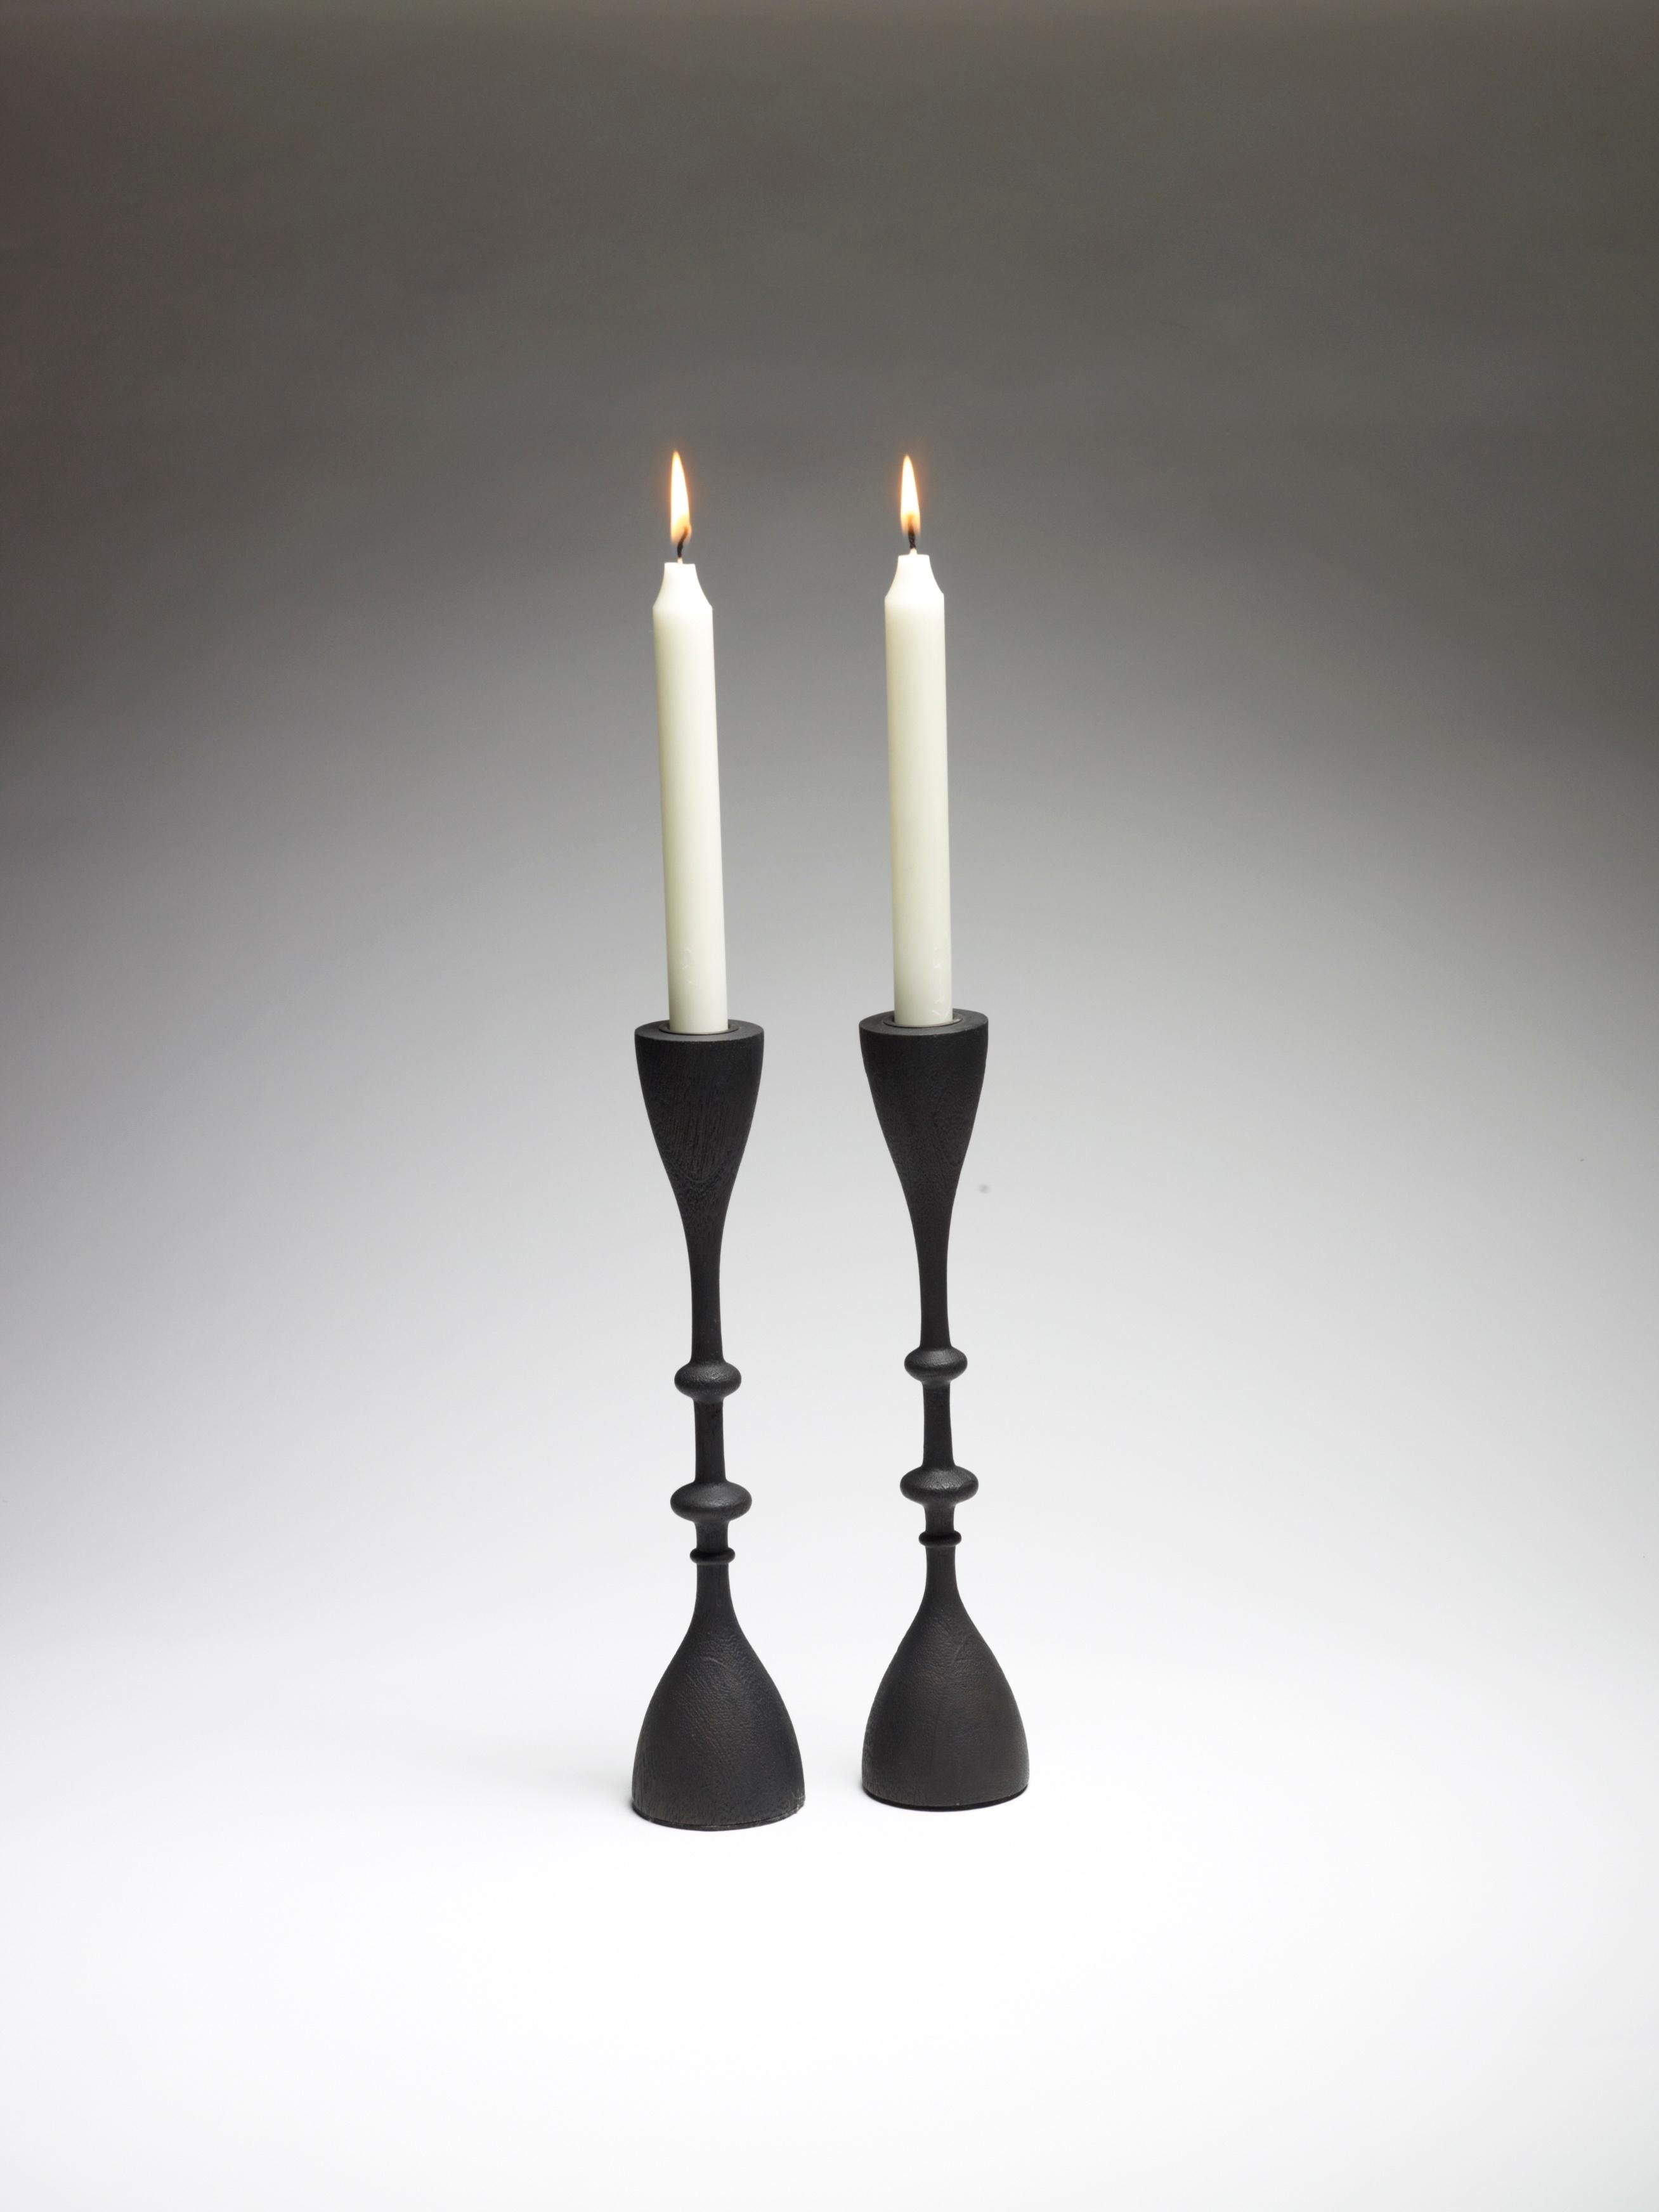 Wave Candlestick (single candlestick, large, blackened) For Sale 7